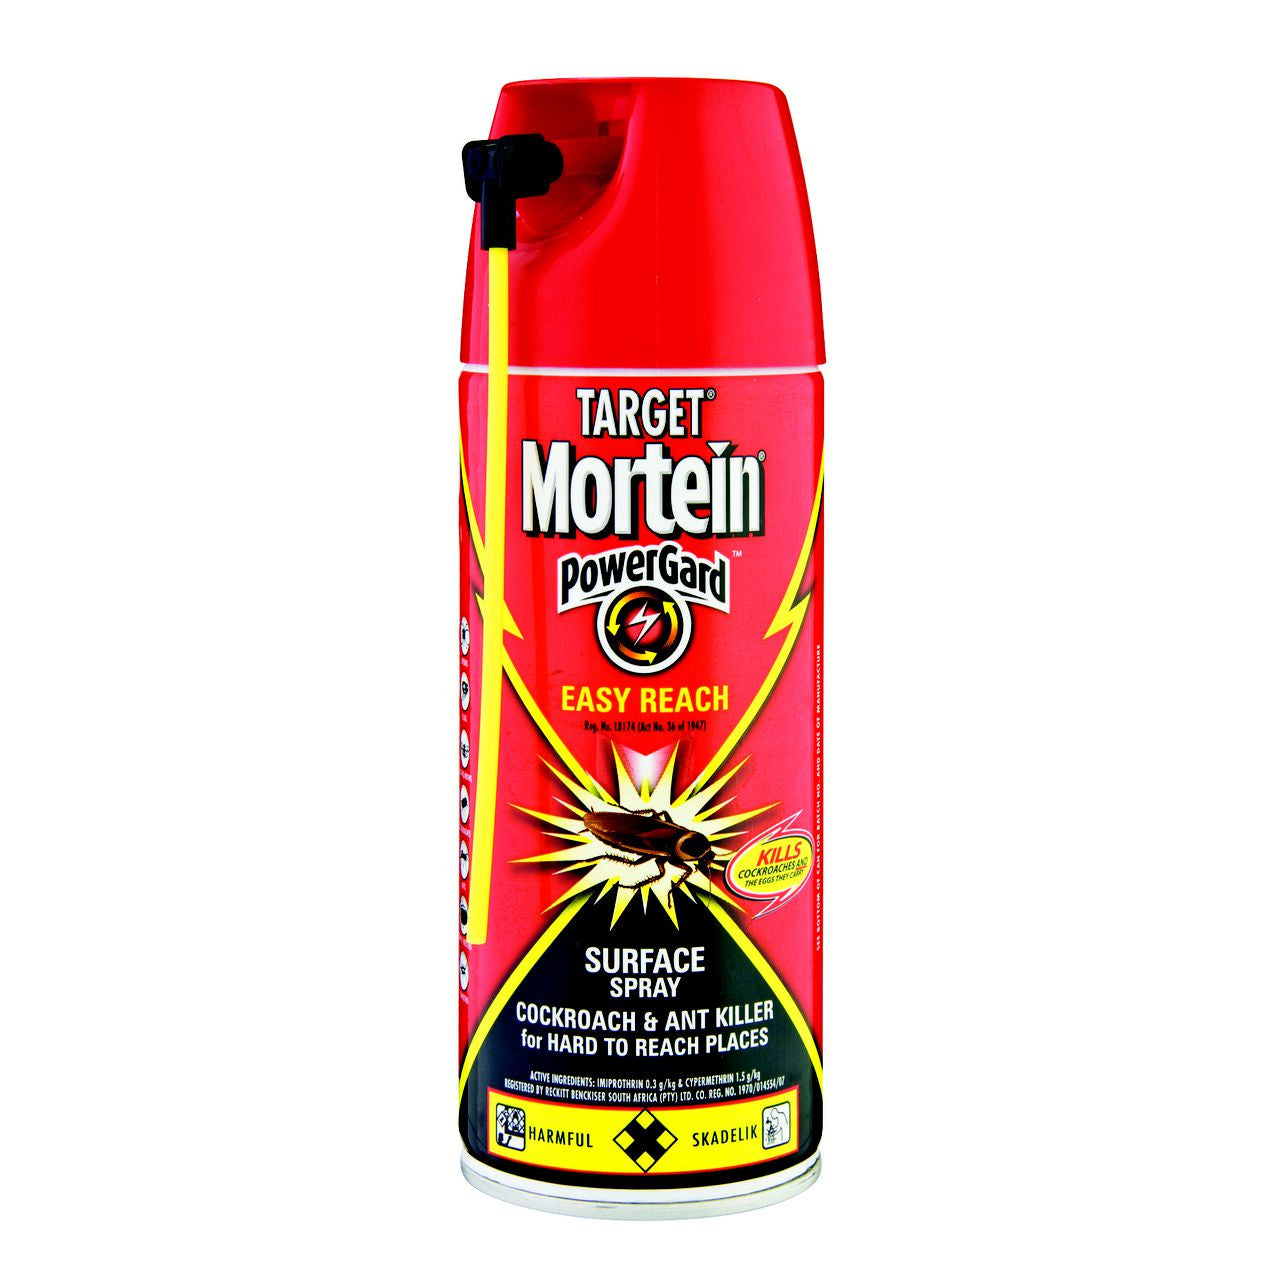 Mortein Surface Insect Spray Easy Reach 250g